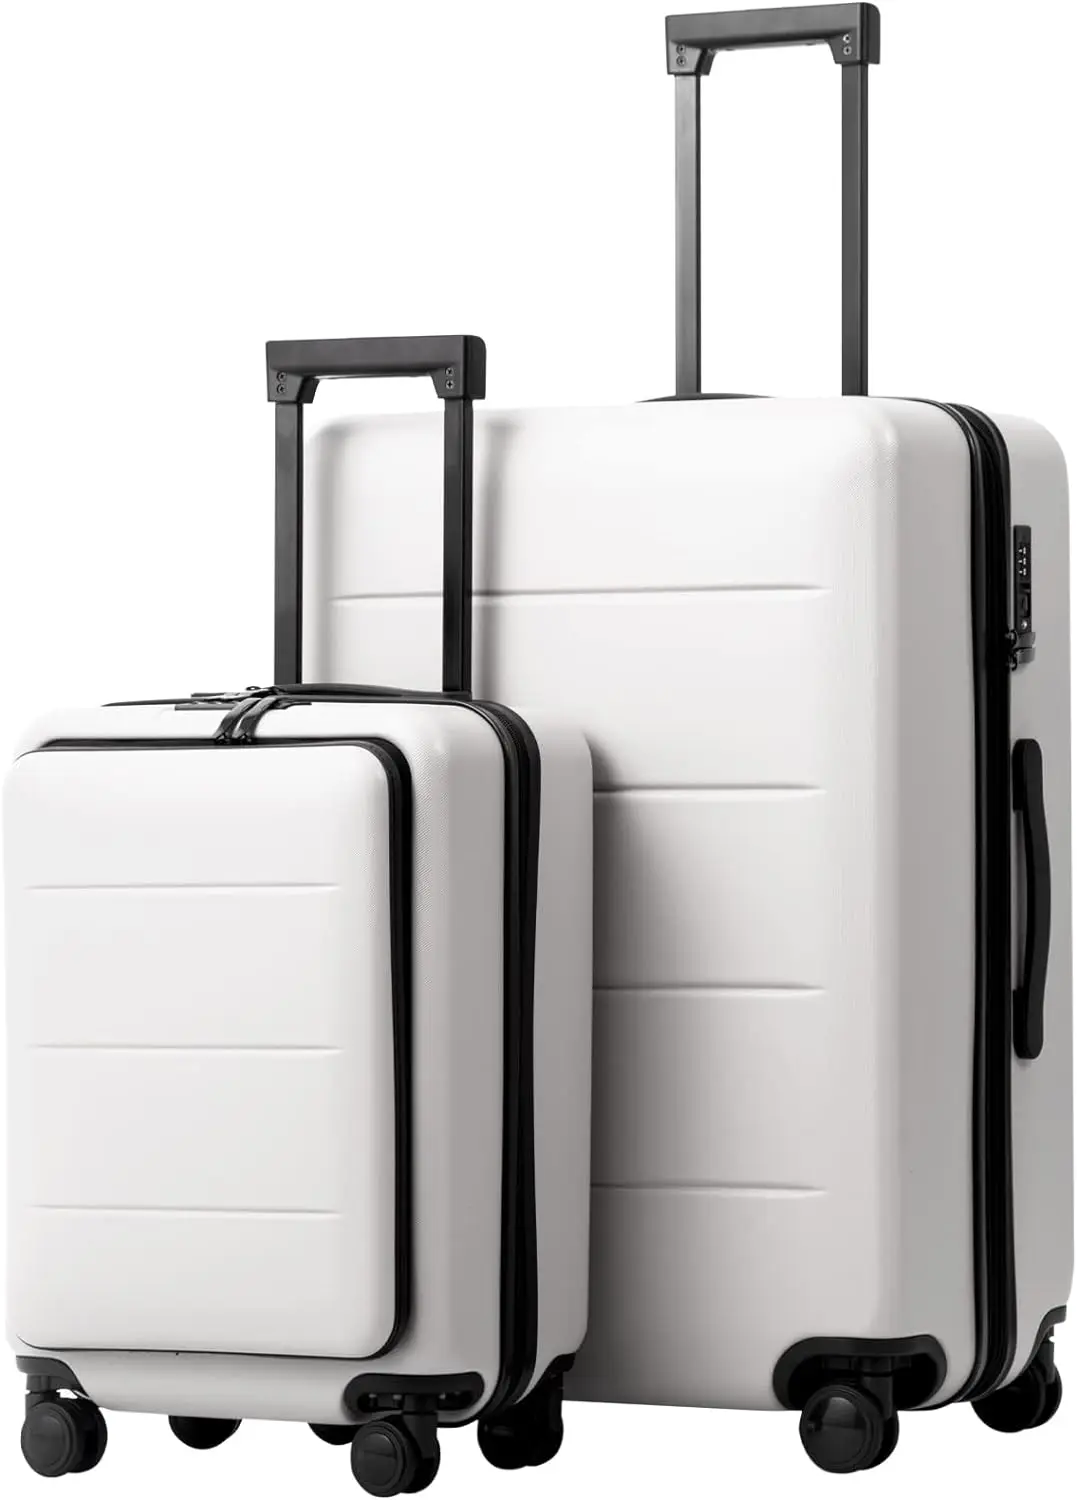 

Coolife Luggage Suitcase Piece Set Carry On ABS+PC Spinner Trolley with pocket Compartment Weekend Bag (White, 2-piece Set)